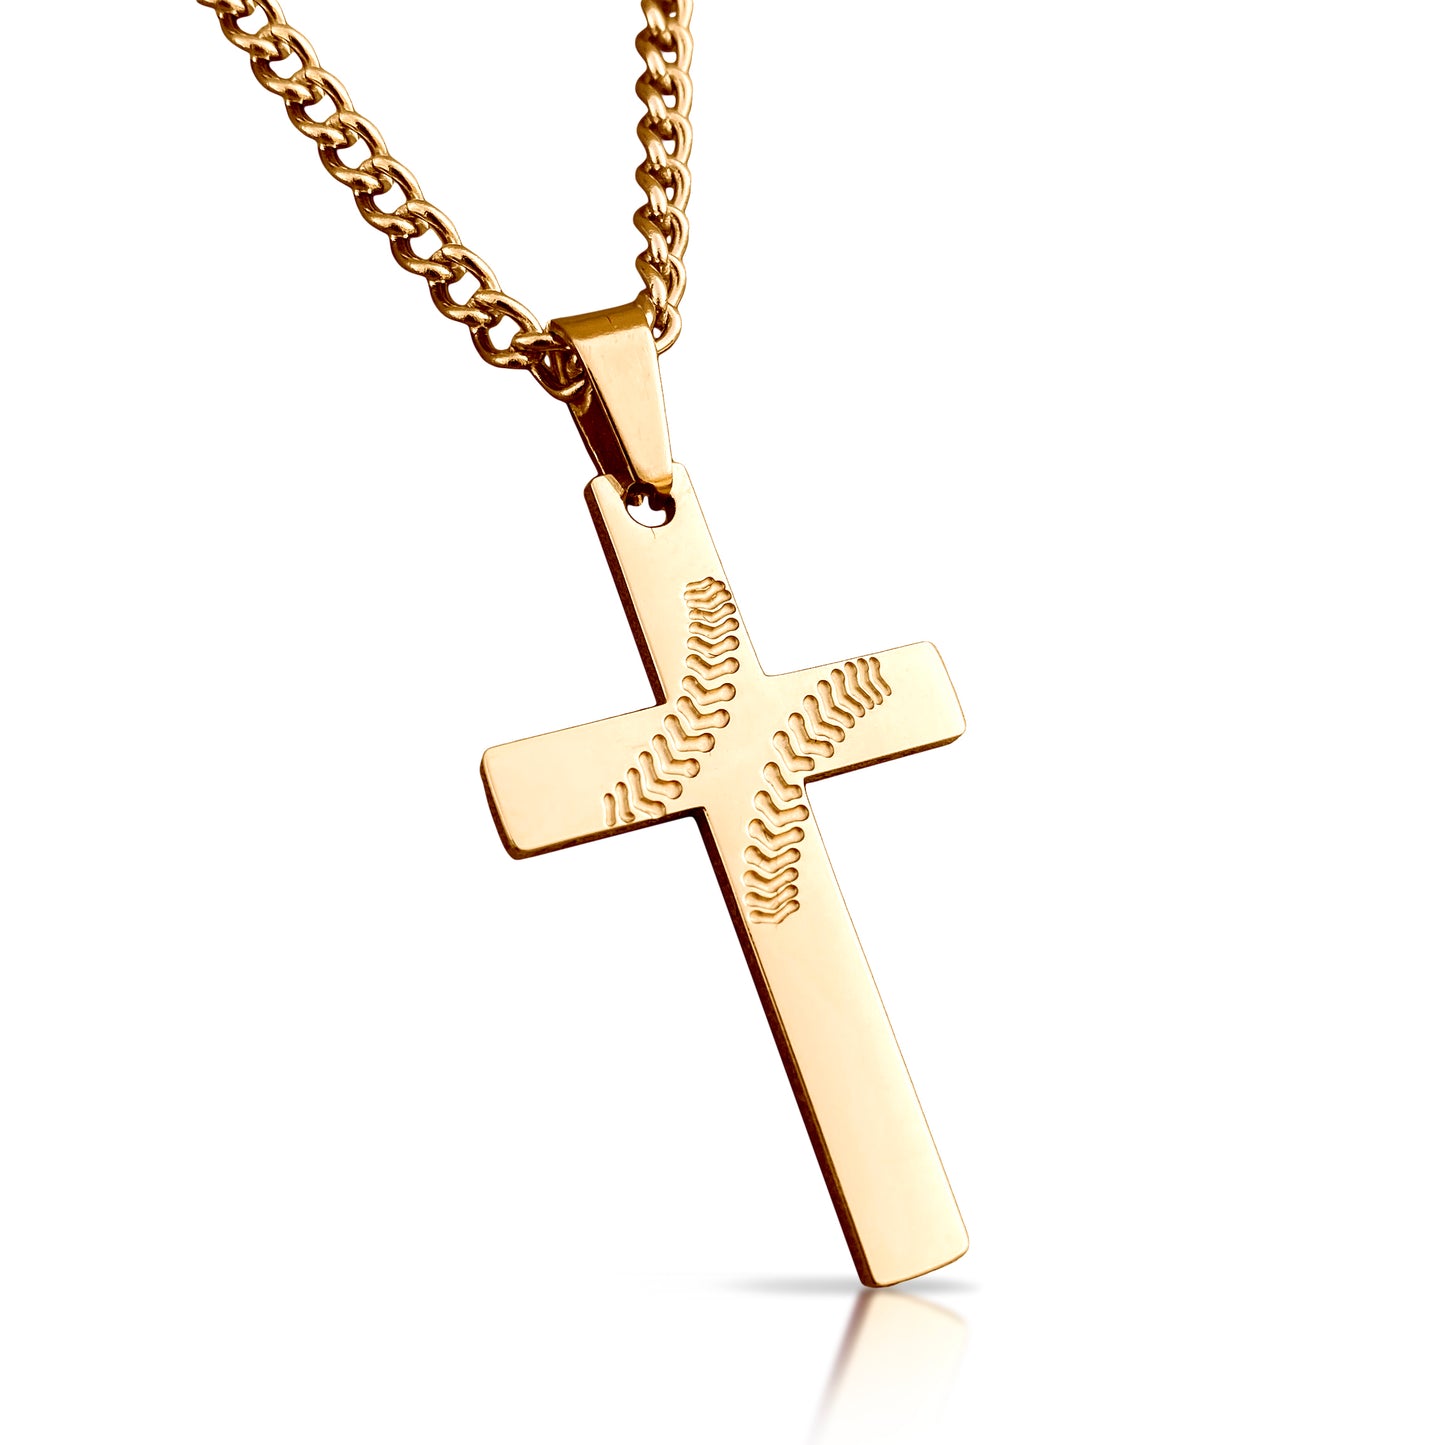 Baseball Cross Pendant With Chain Necklace - 14K Gold Plated Stainless Steel